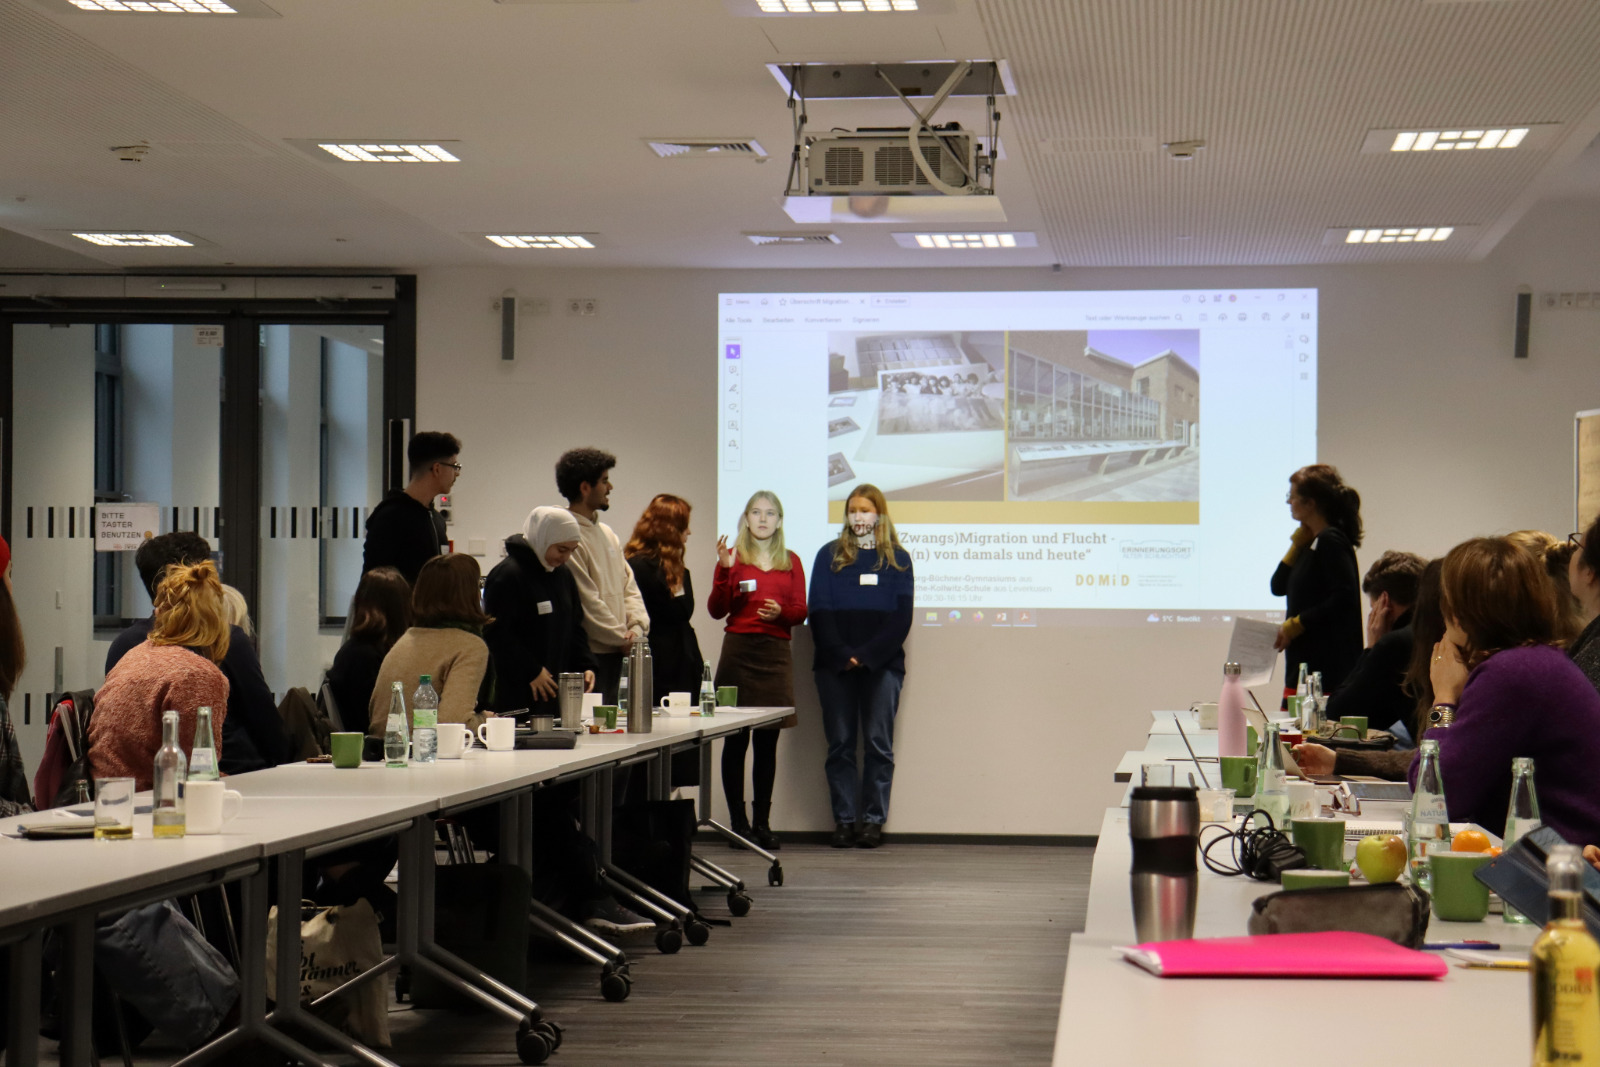 Six high school students from the Käthe Kollwitz School (Leverkusen) and the Georg Büchner Gymnasium (Düsseldorf) present the cooperation project and talk about their experiences. Photo: DOMiD Archive Cologne